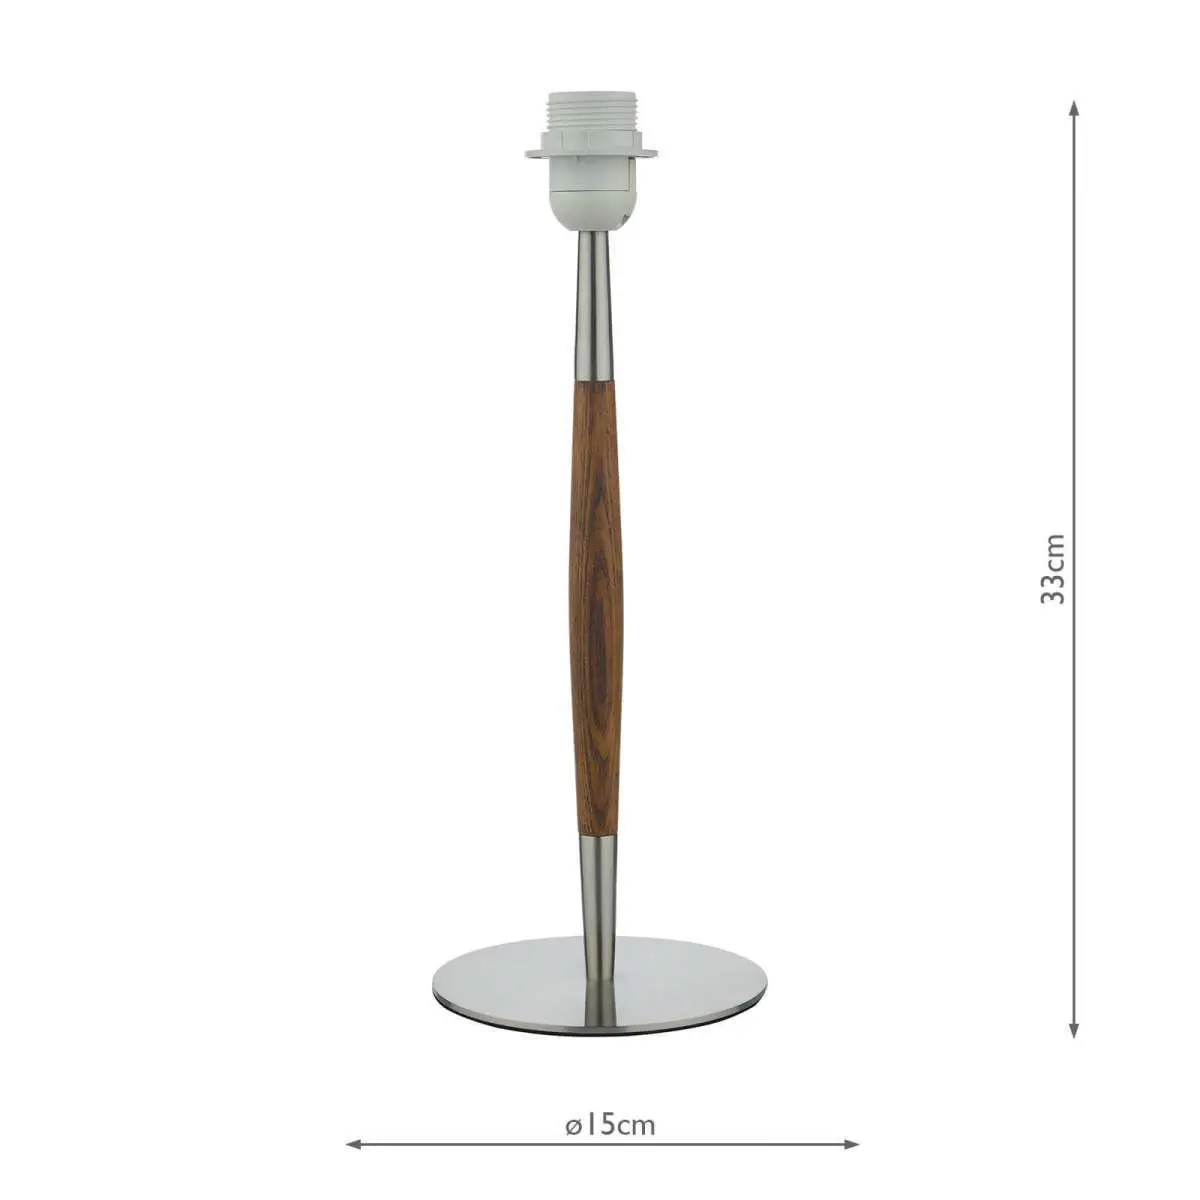 Detroit Base Only Table Lamp in Satin Nickel & Walnut